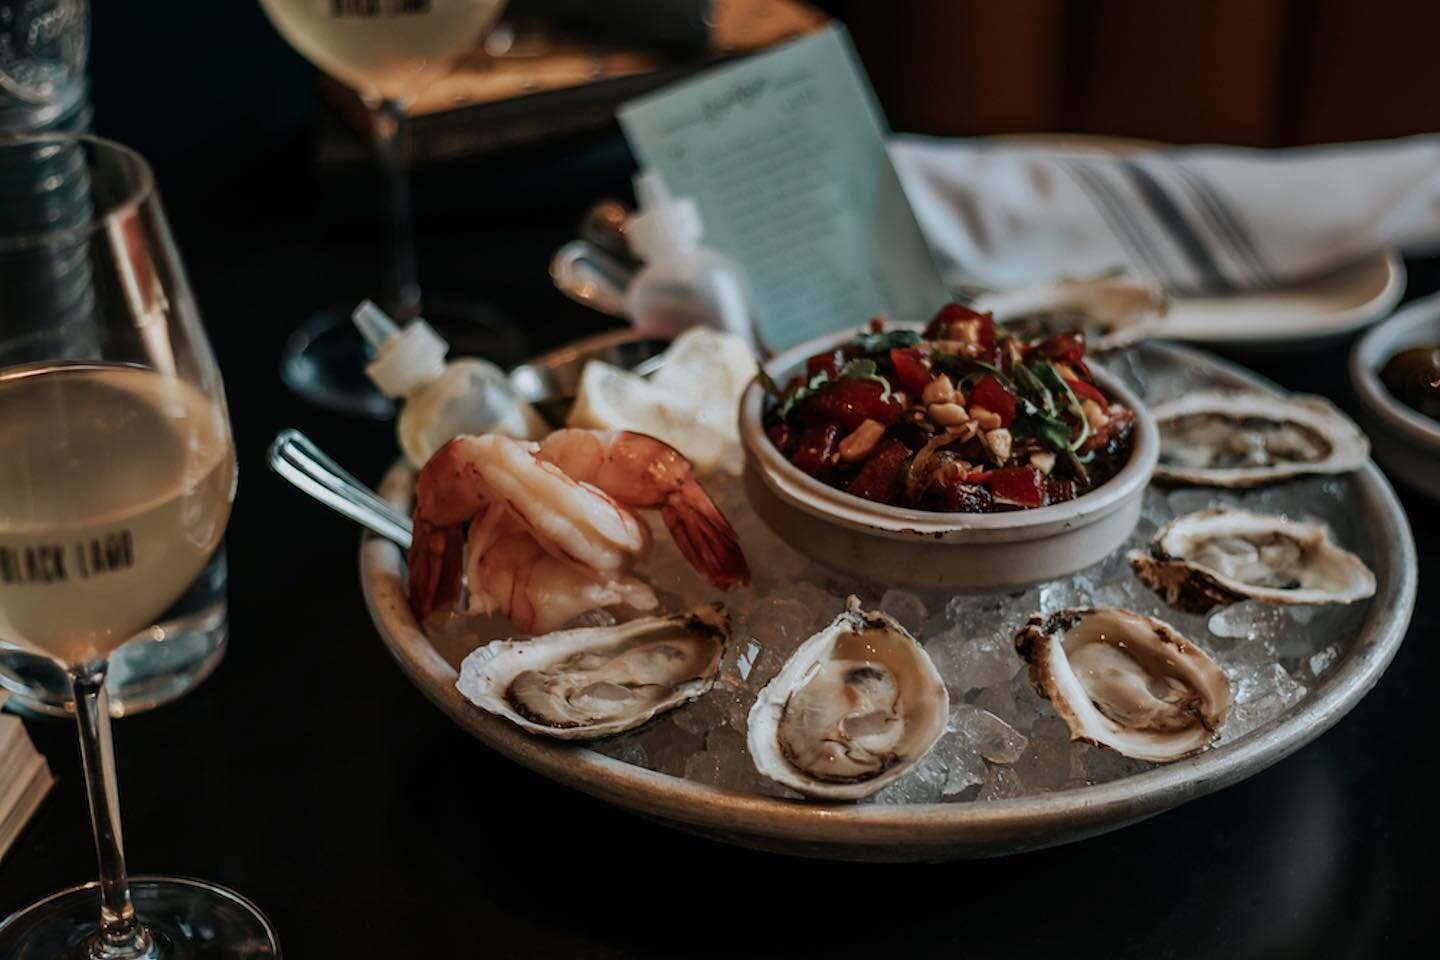 Black lamb has $1 oysters **everyday** until 5pm!

Even though oysters are typically a 'summer' thing, they're allegedly better in the winter months. It's an old adage that goes back to 1599 that you should only eat oysters in months that end in 'R' 